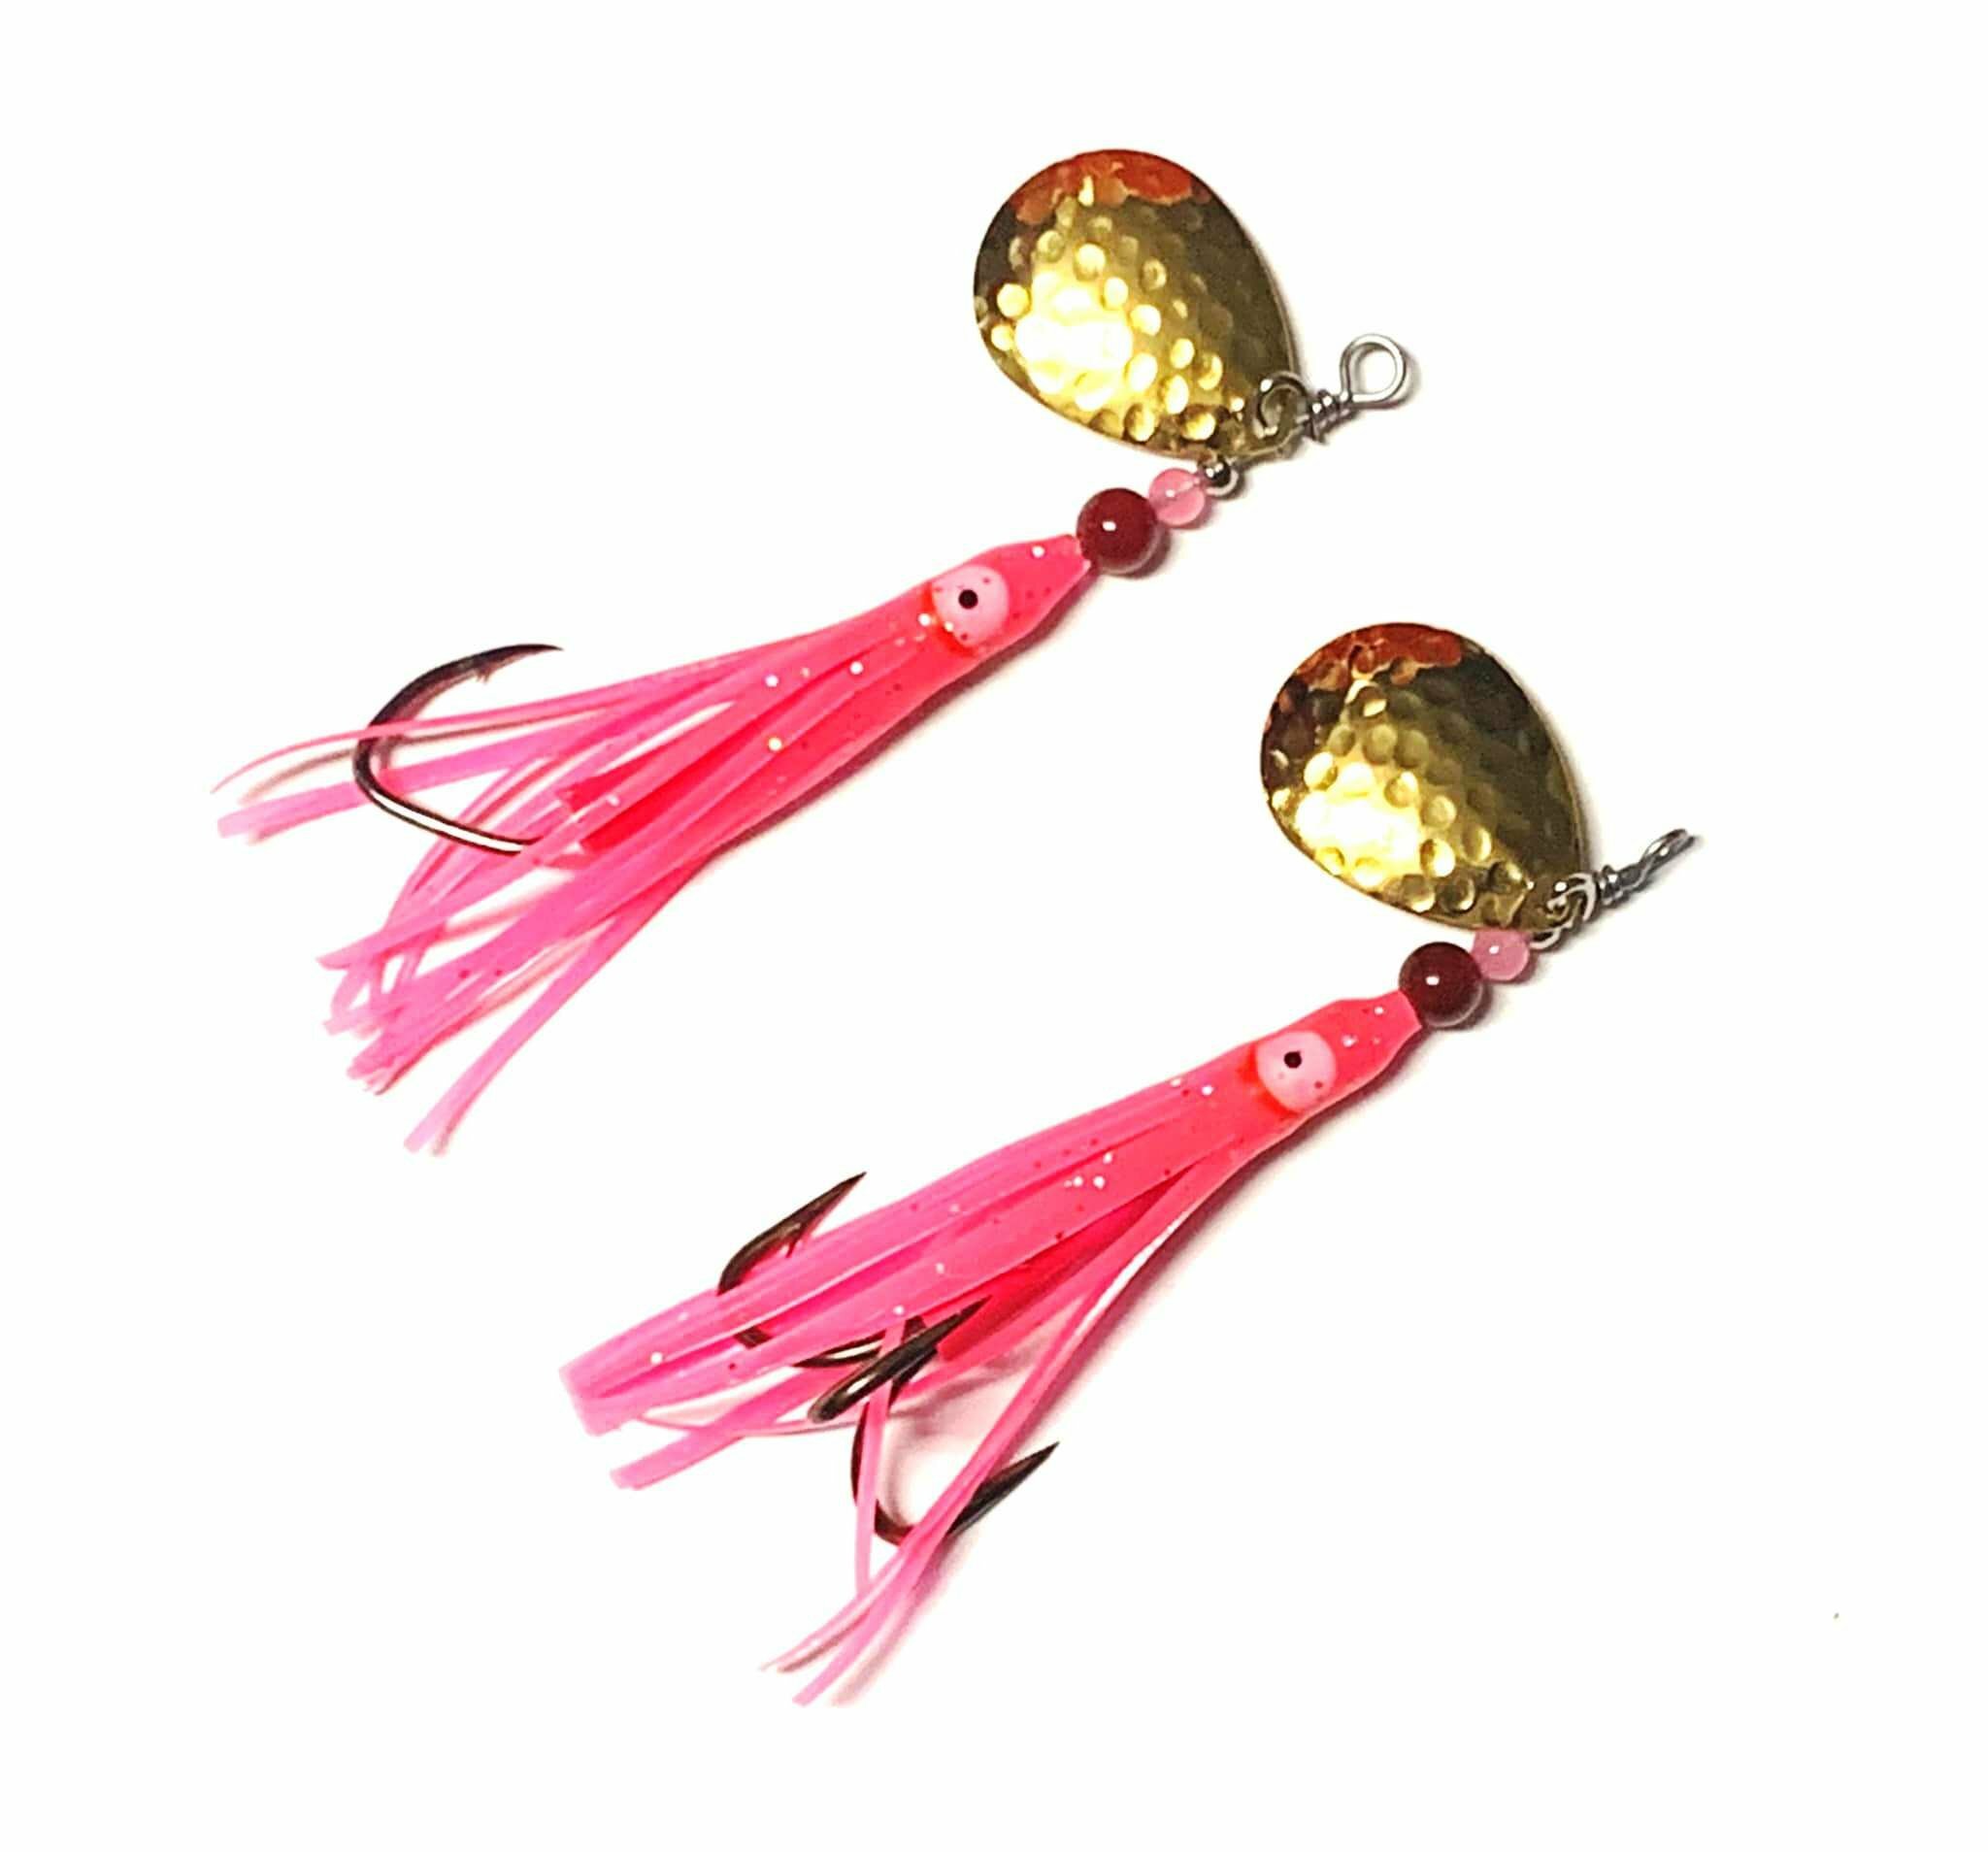 Made some salmon size hoochie spinners